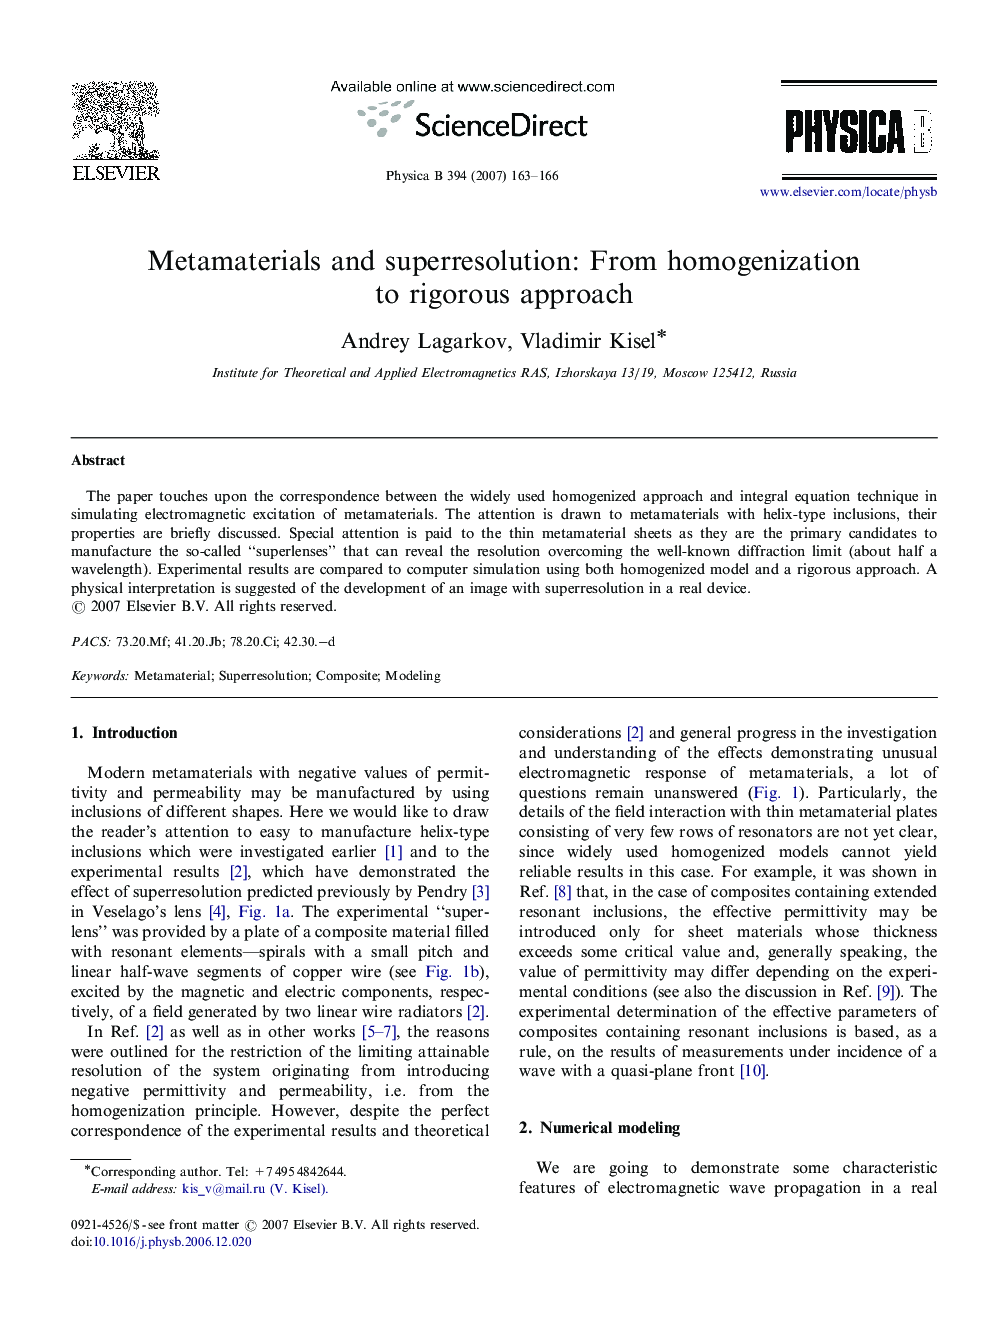 Metamaterials and superresolution: From homogenization to rigorous approach